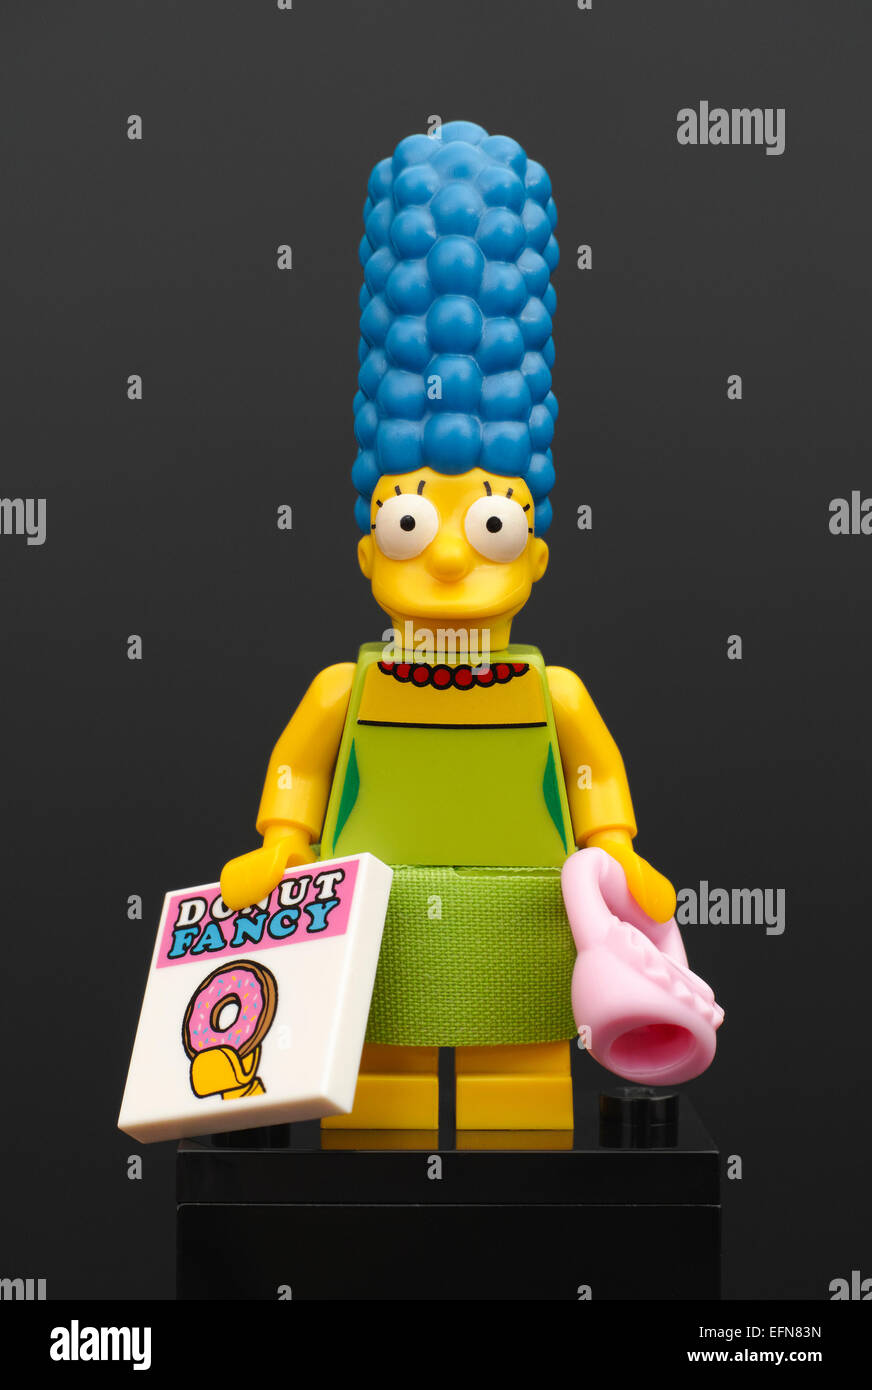 Lego Marge Simpson minifigure with pink purse and magazine Donut Fancy on black background Stock Photo